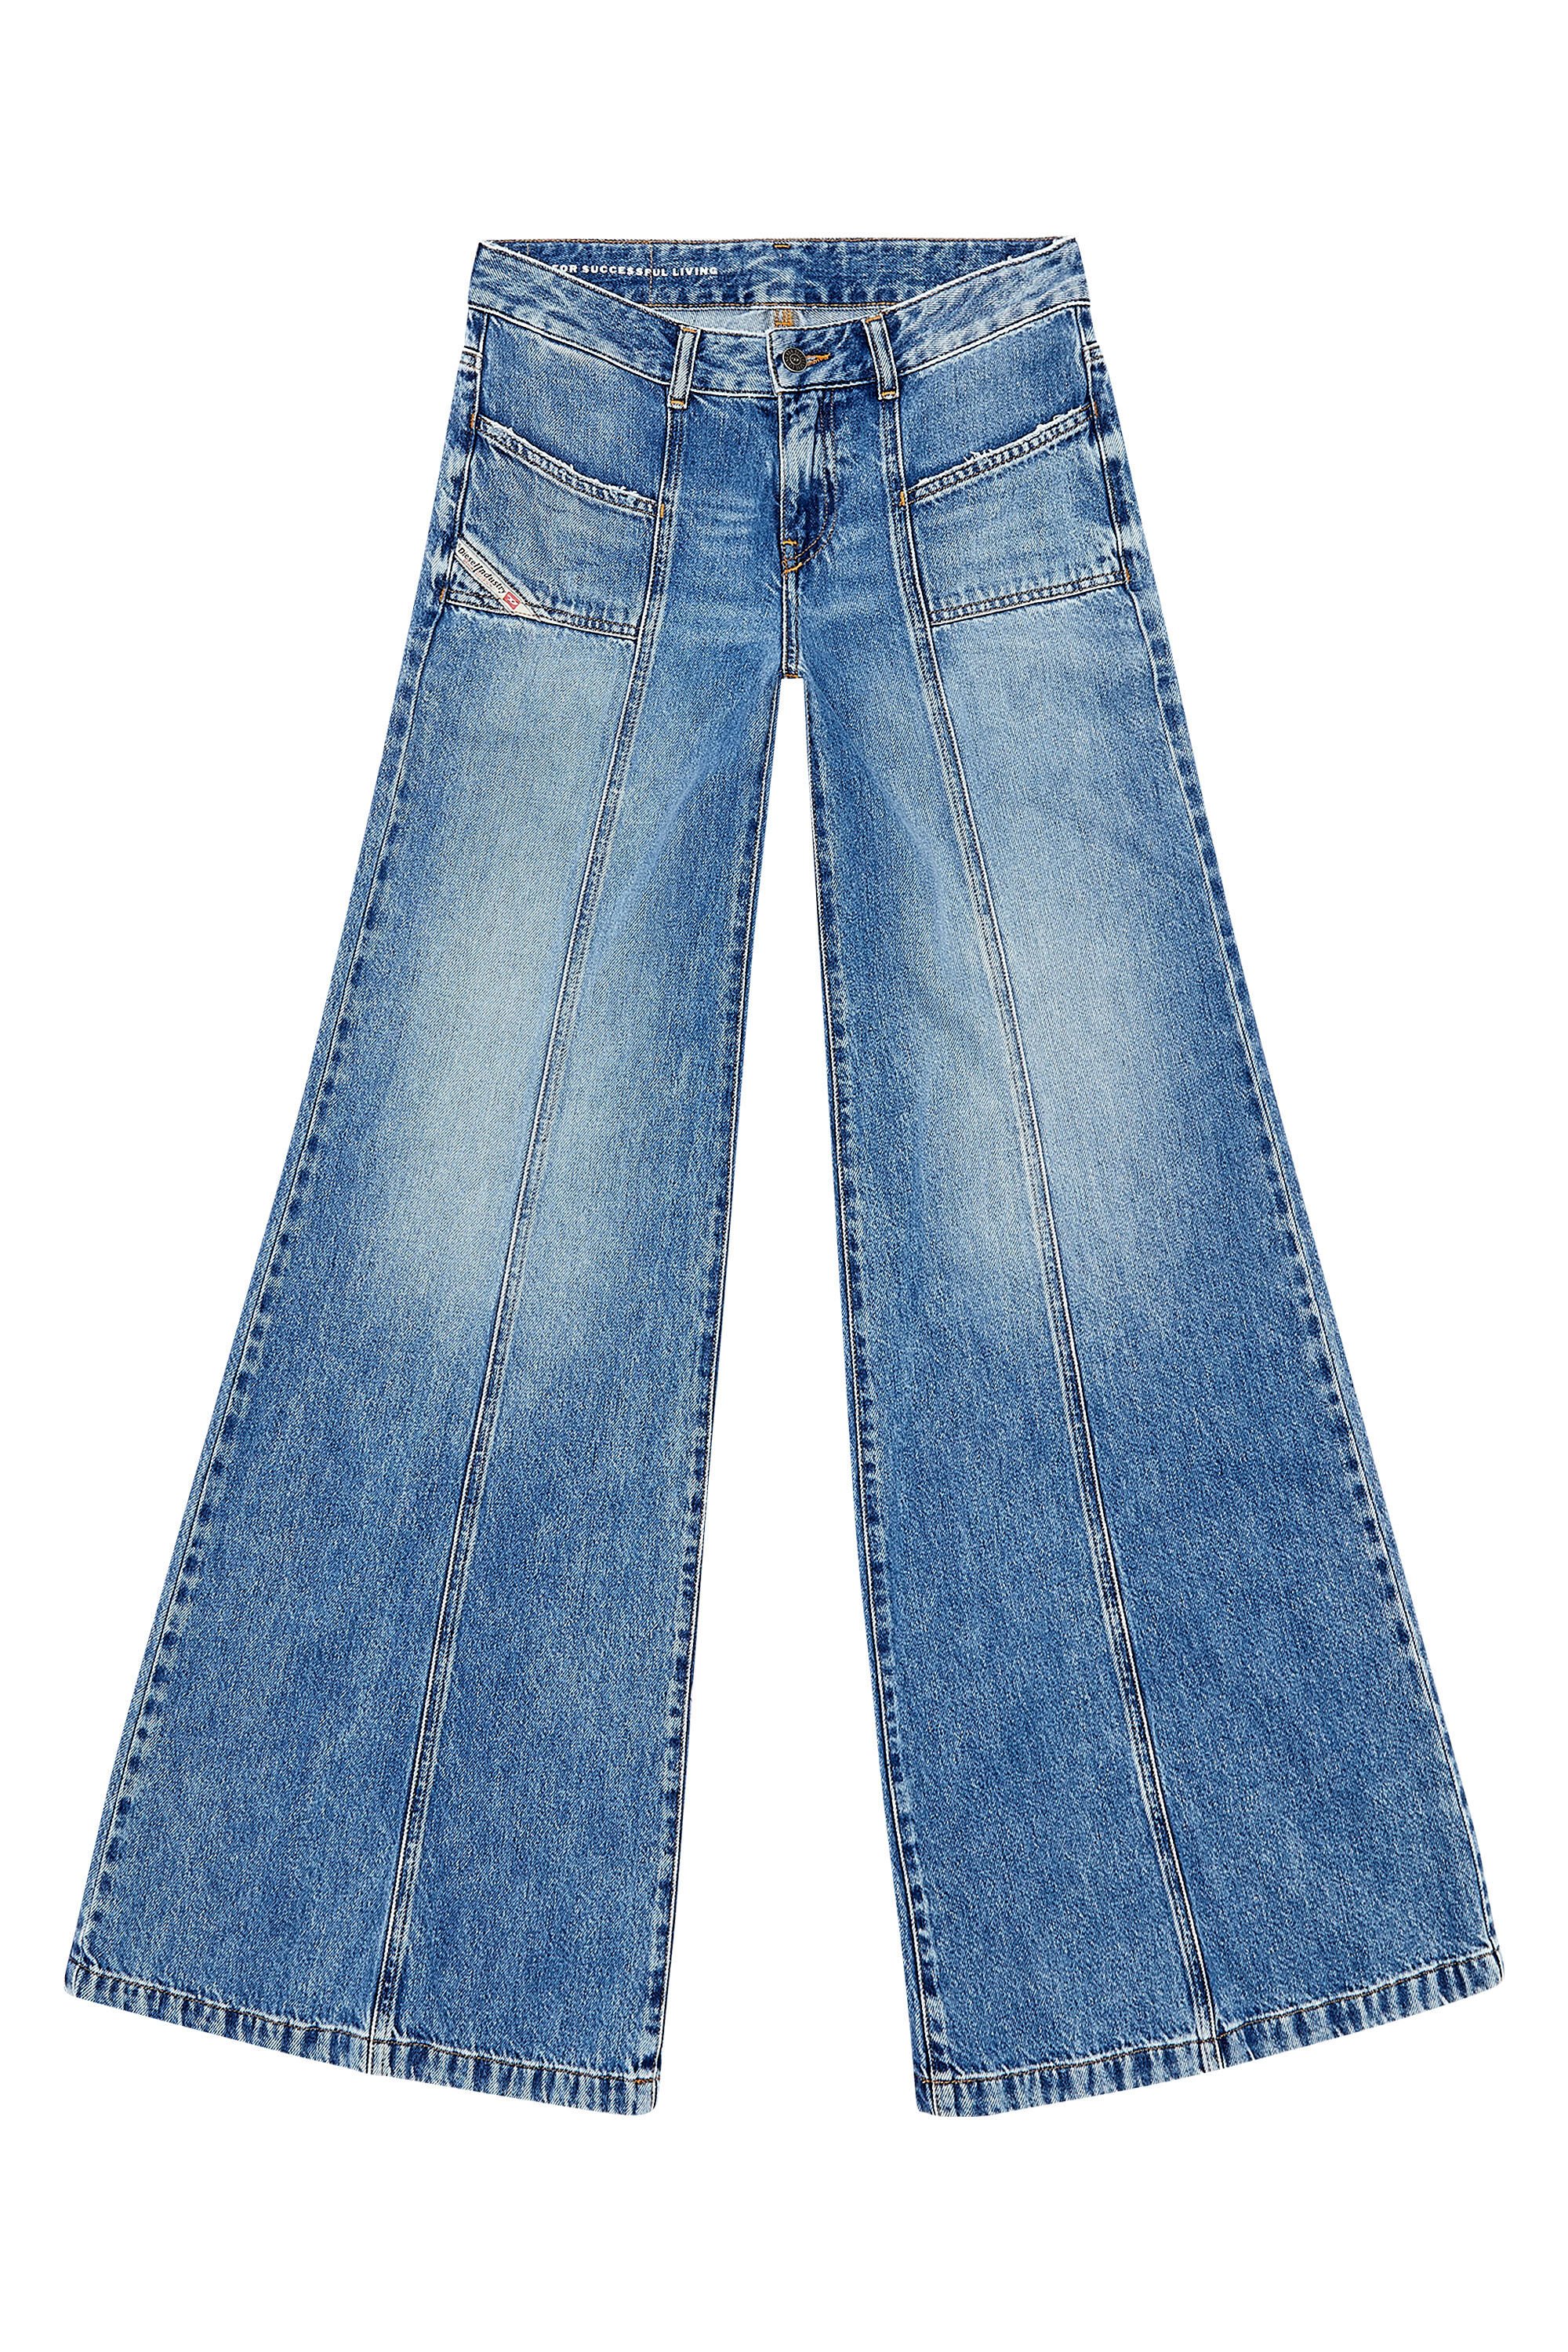 Women's Bootcut and Flare Jeans | Medium blue | Diesel D-Akii